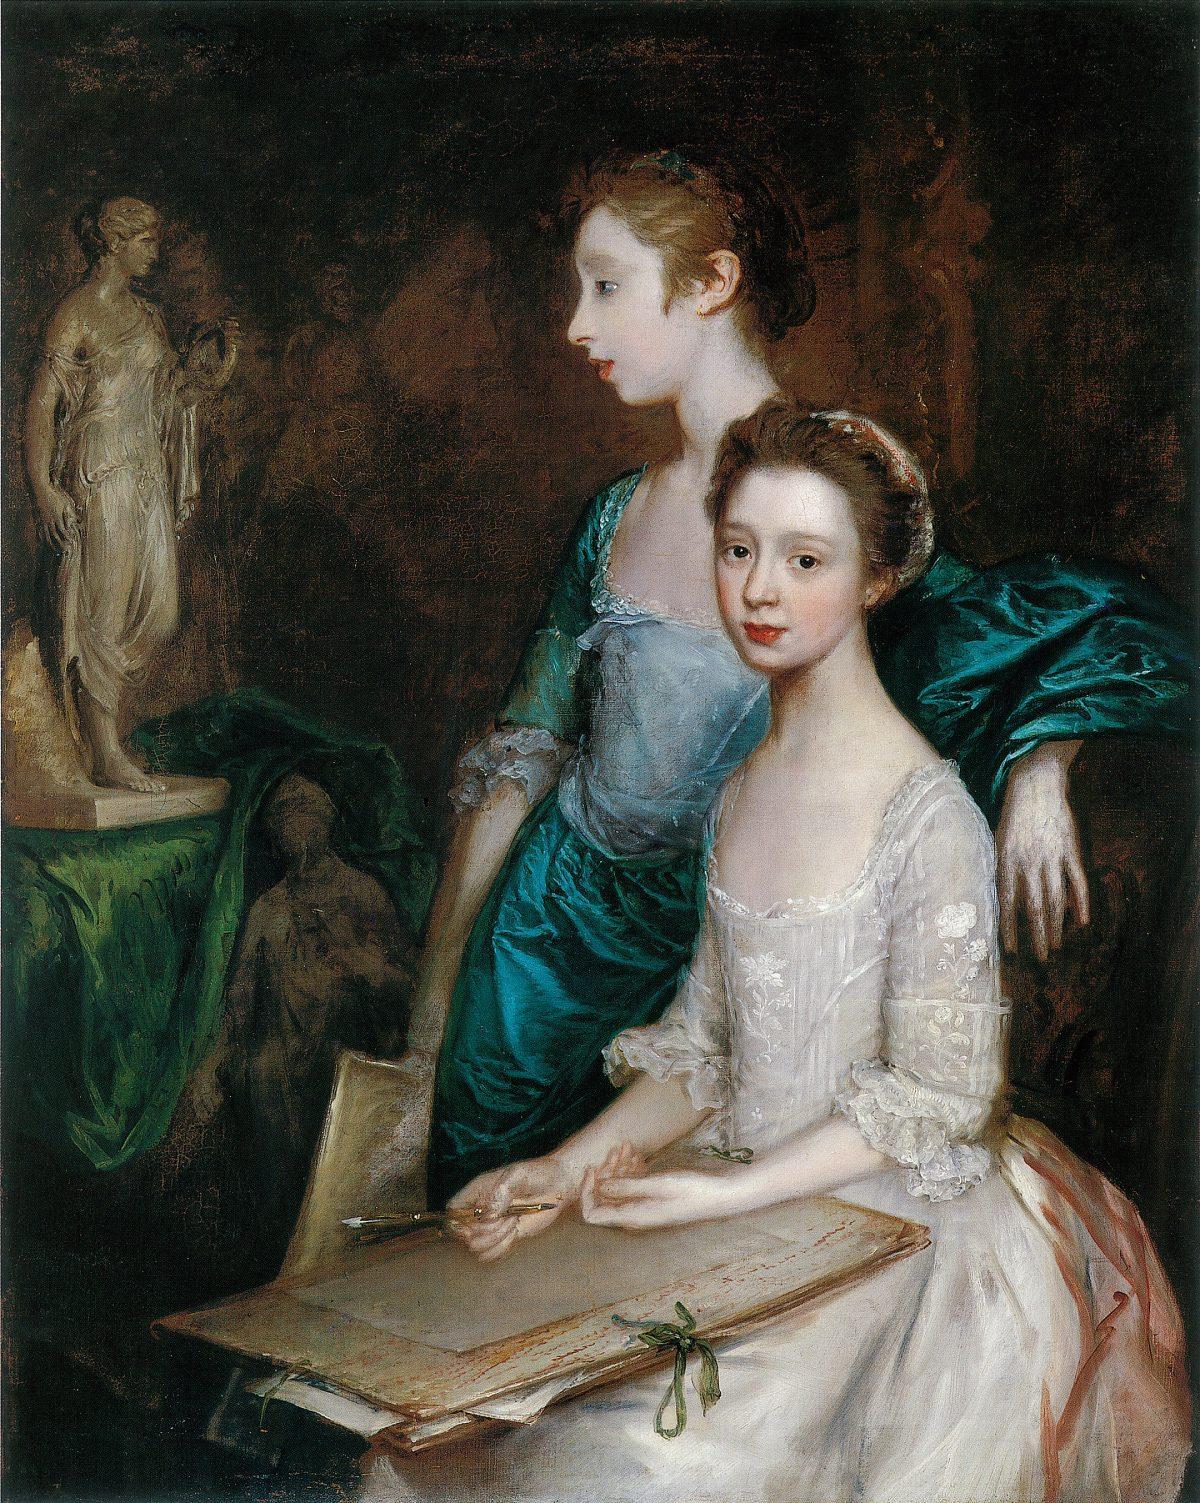 “Mary and Margaret Gainsborough, the Artist’s Daughters, at Their Drawing,” circa 1763–1764, by Thomas Gainsborough. Oil on canvas. Museum purchased, Worcester Art Museum, Massachusetts. (Worcester Art Museum)